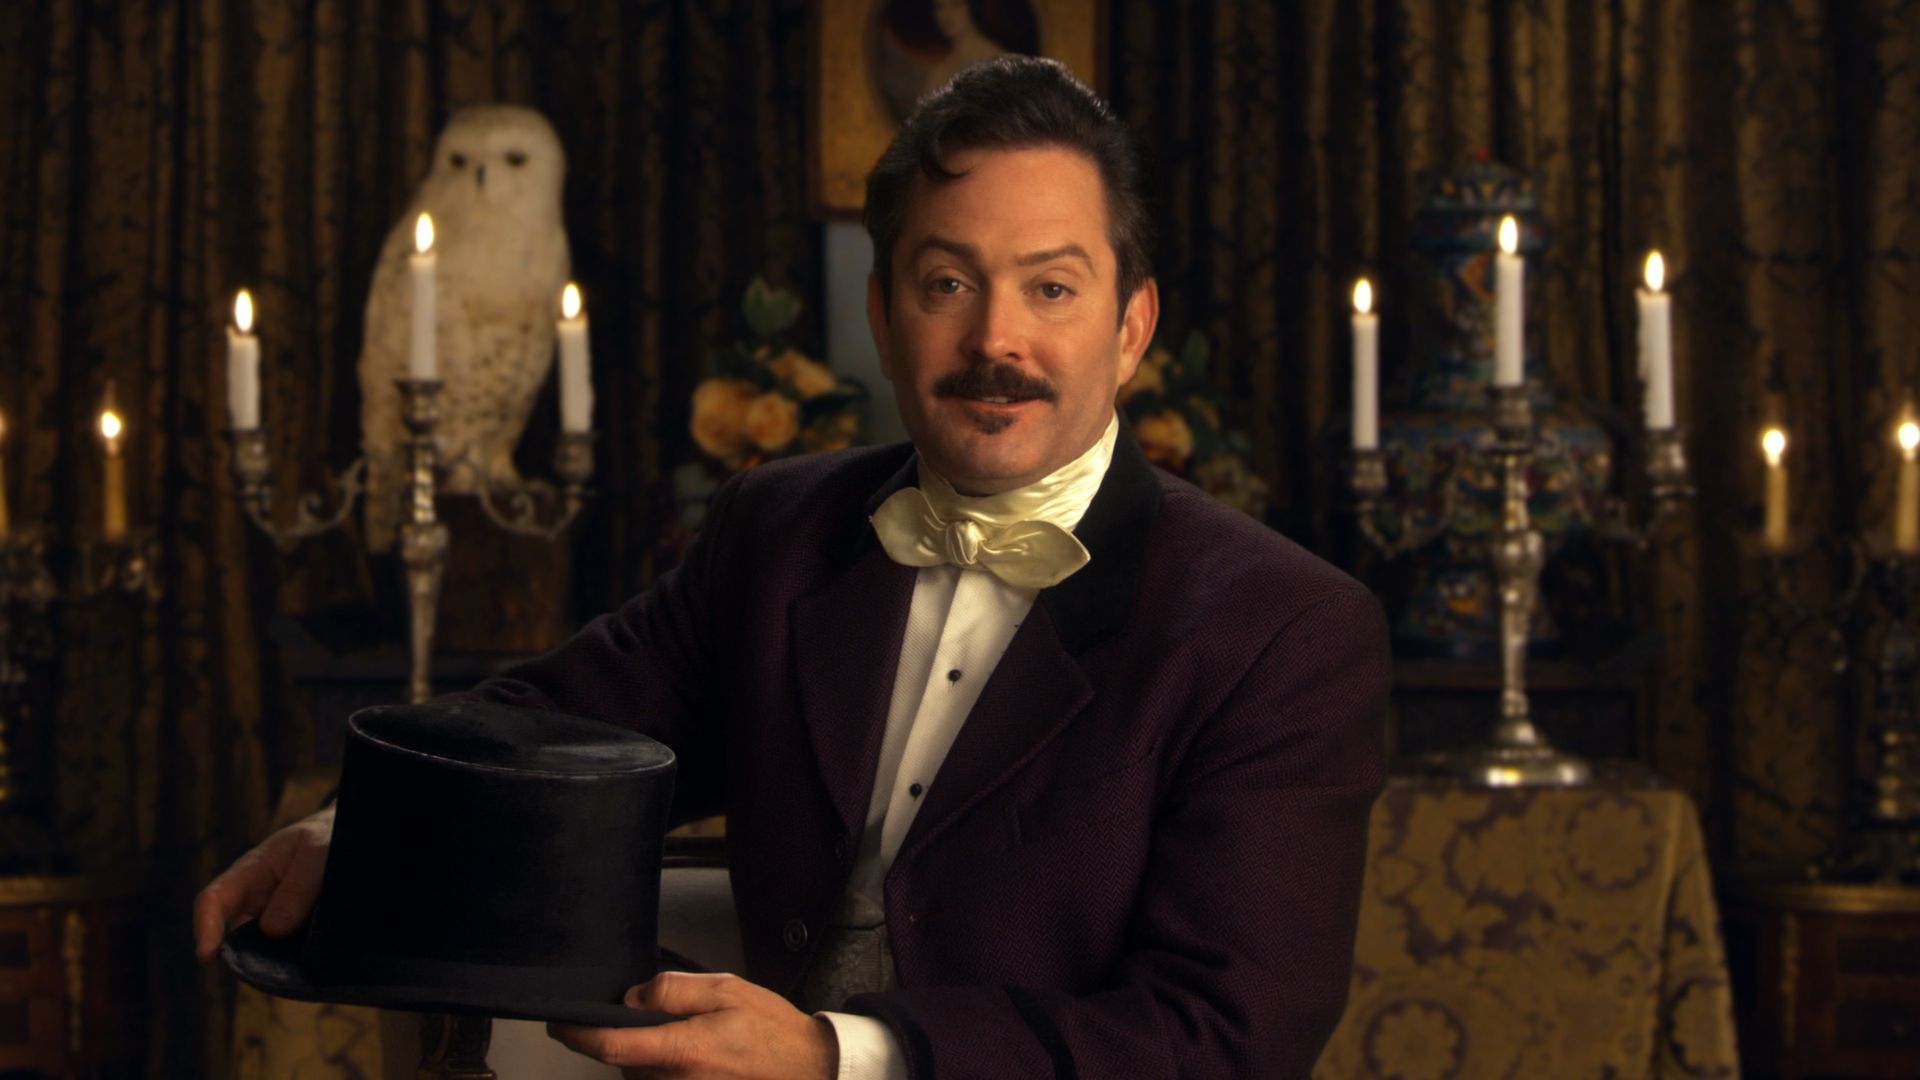 Another Period background